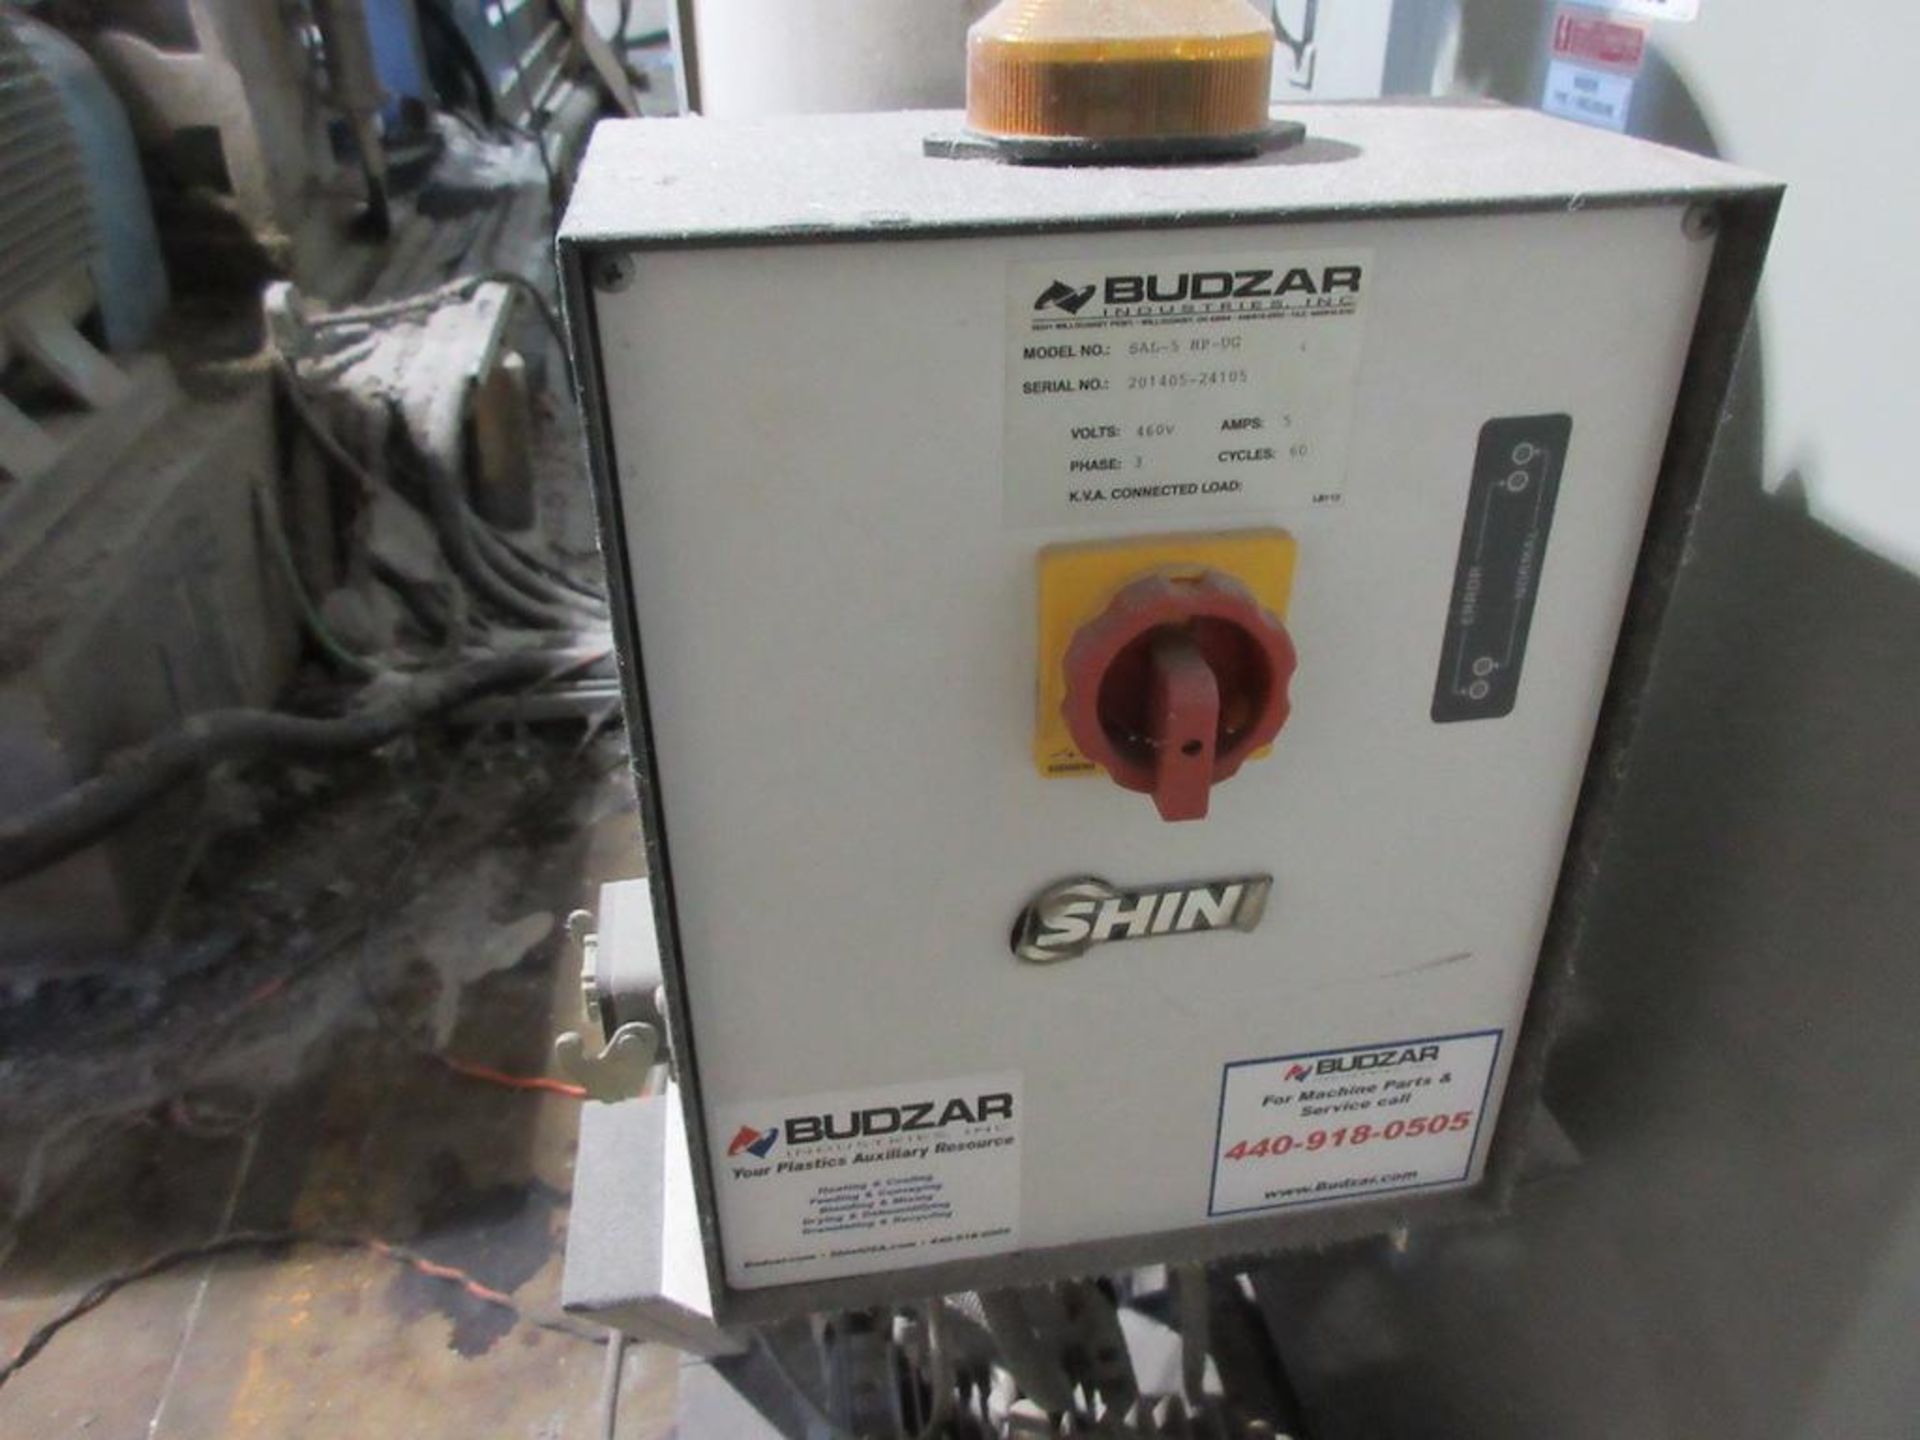 Shini Vacuum pump, Model SAL-5 HP-UP, 460V, sn 201405-24105, includes rolling tote and clear pipe wi - Image 2 of 6